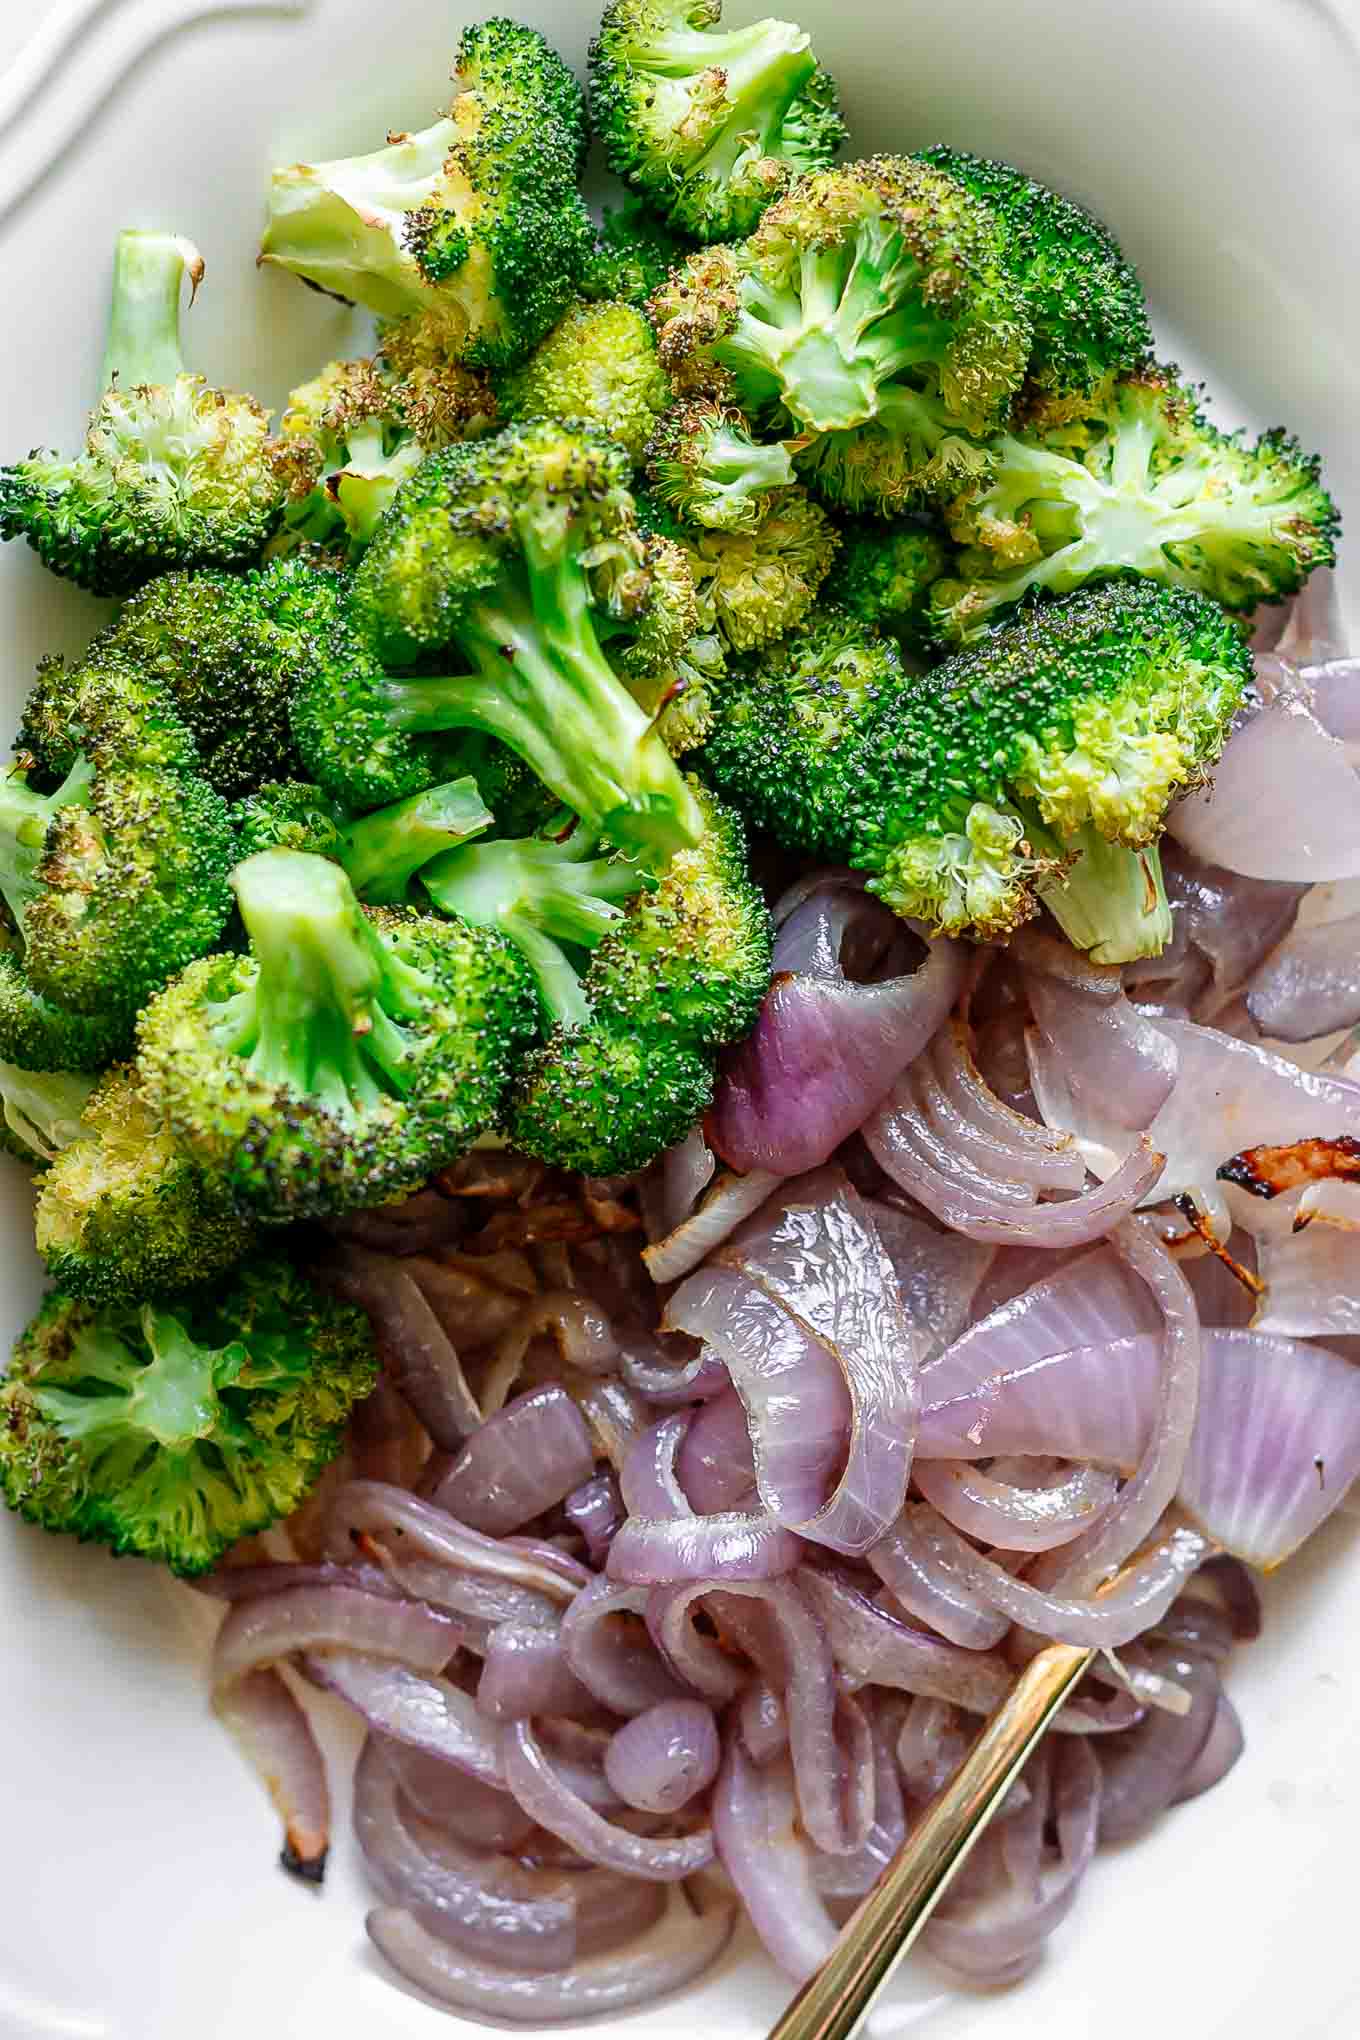 a close up photos of a side dish with baked onions and broccoli